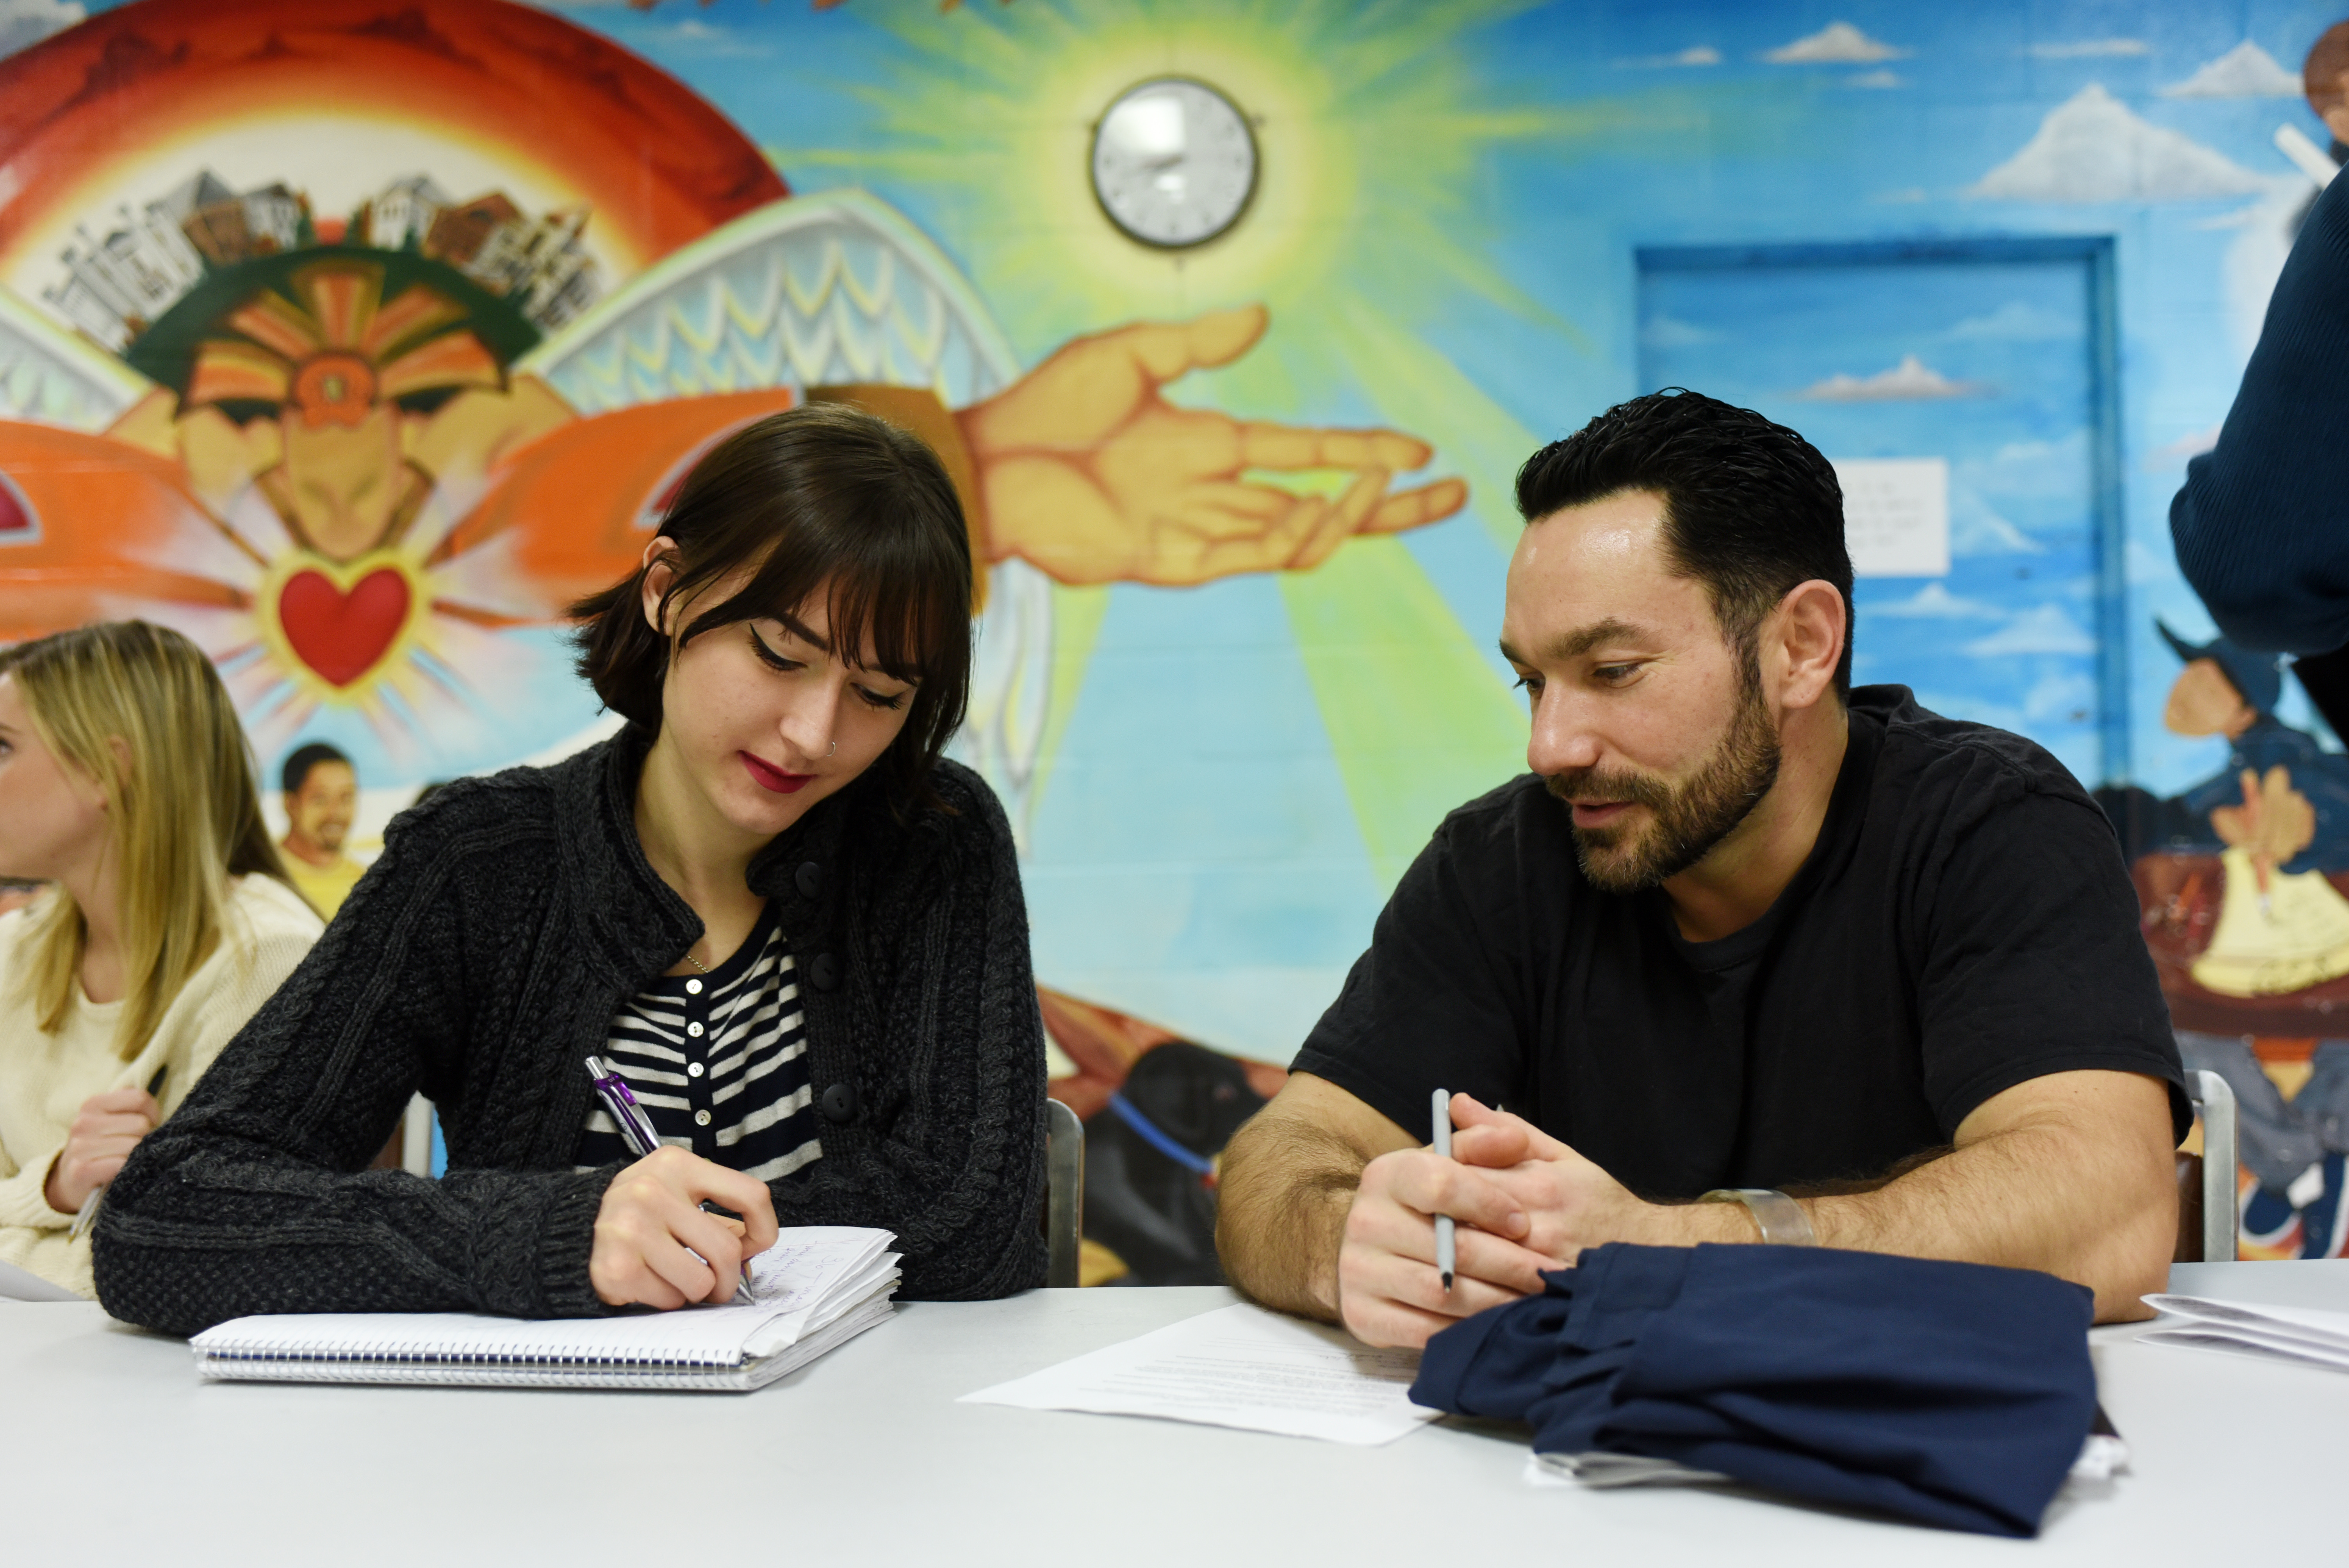 Students Allyson Morin and Eric Zulch, an inmate, at work in a UMass social justice journalism and mass incarceration class taught at the Hampshire County Jail and House of Correction in Northampton, Massachusetts